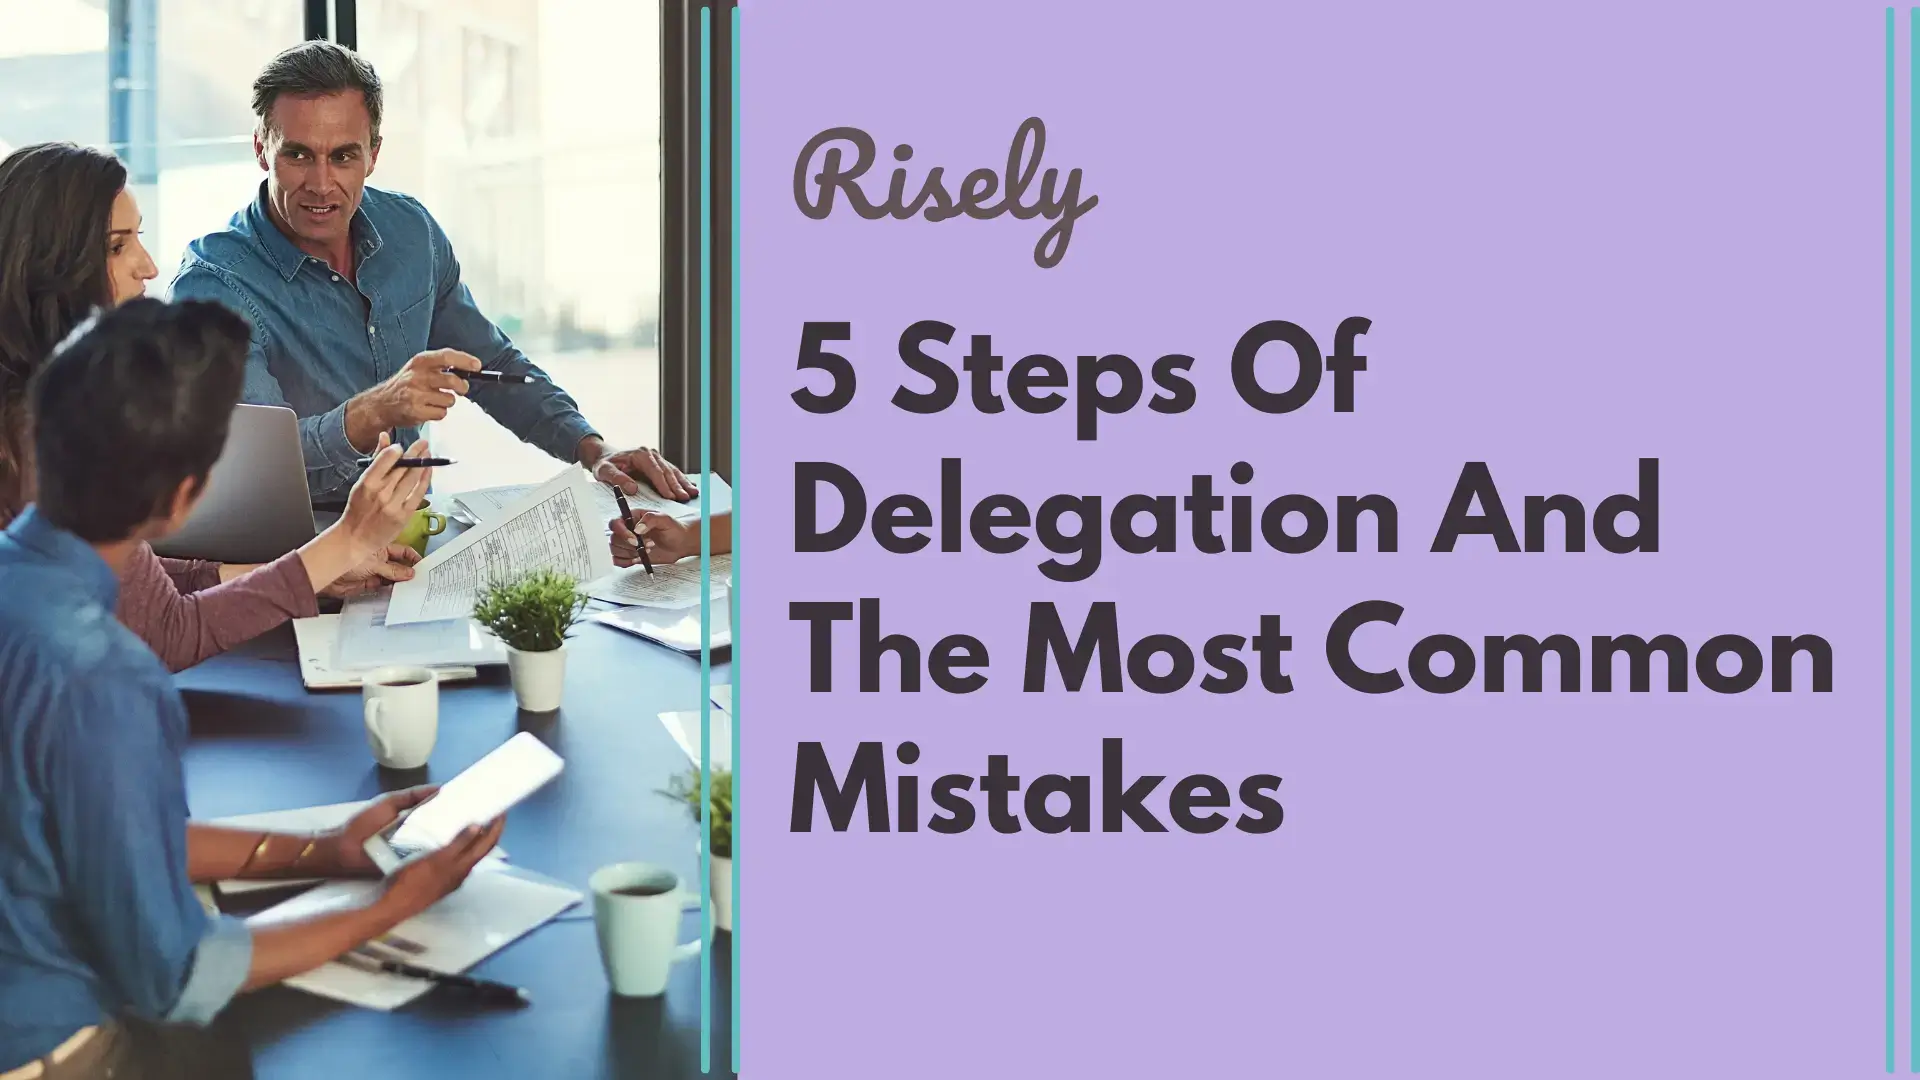 5 Steps Of Delegation And The Most Common Mistakes